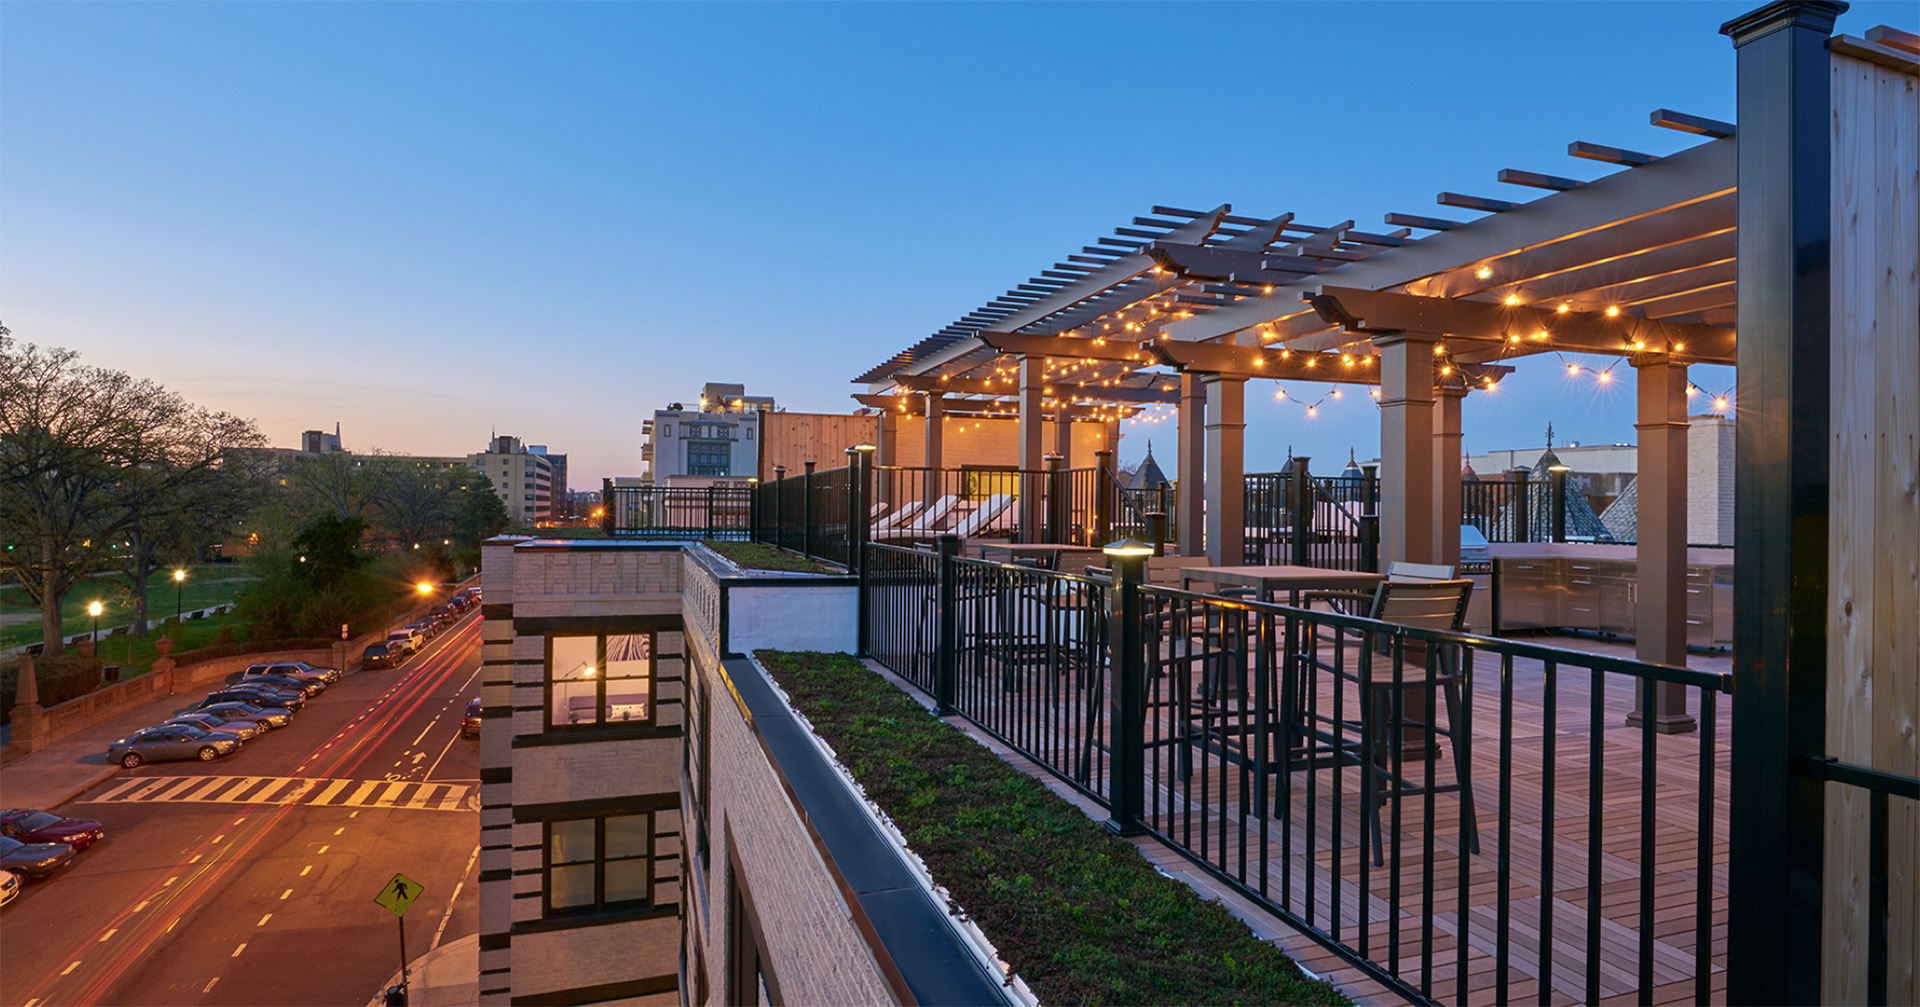 Evening view of a rooftop deck with pergola and LED-lit railings overlooking a city street